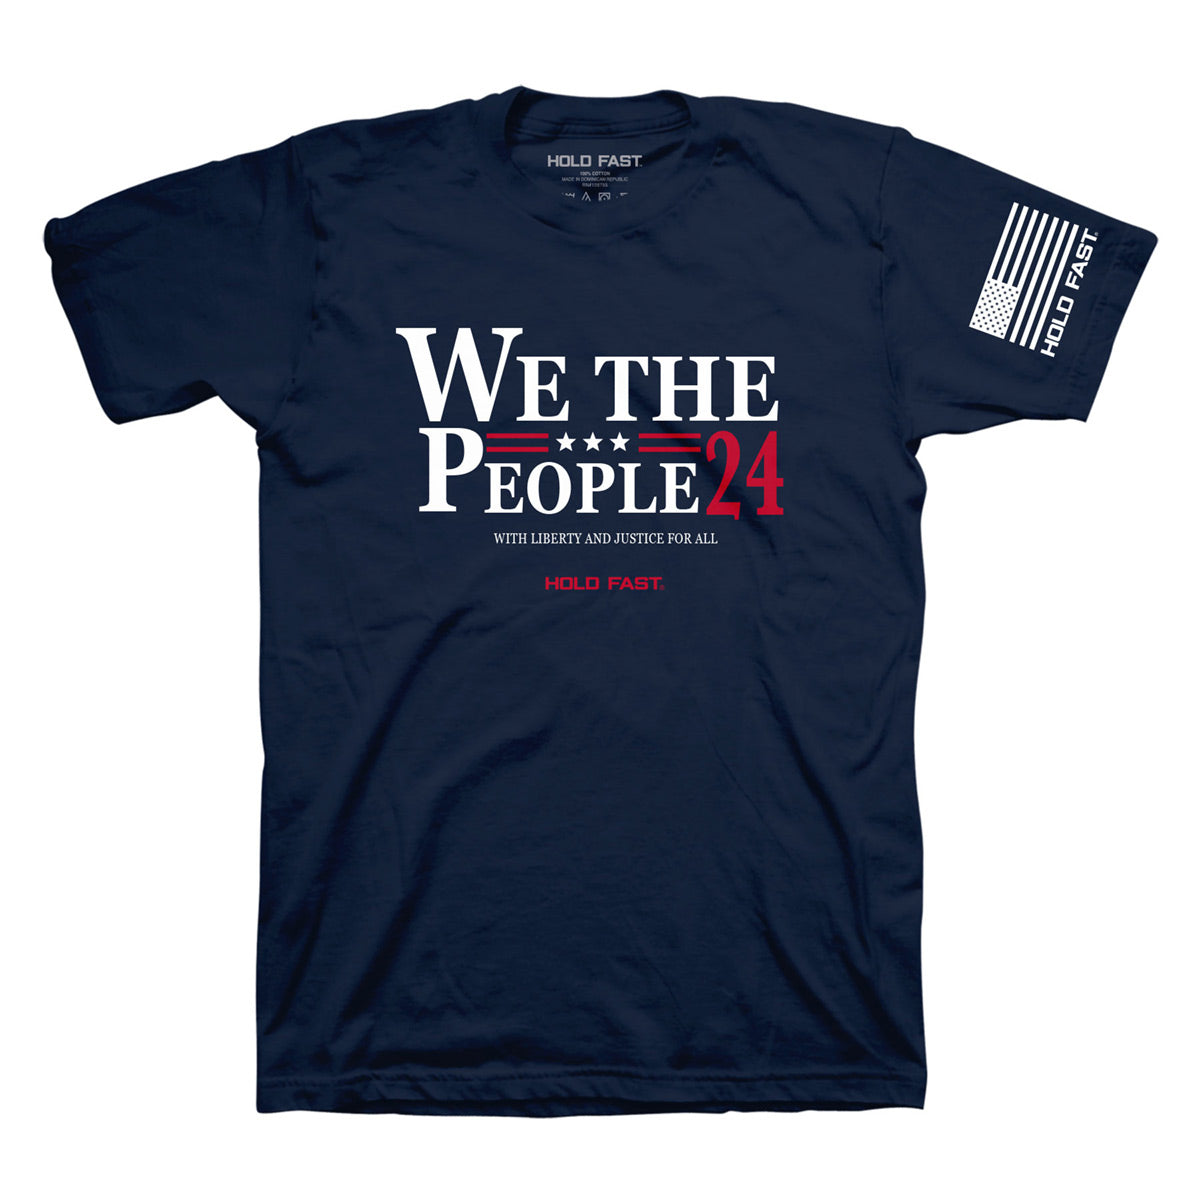 HOLD FAST Mens T-Shirt We The People 24